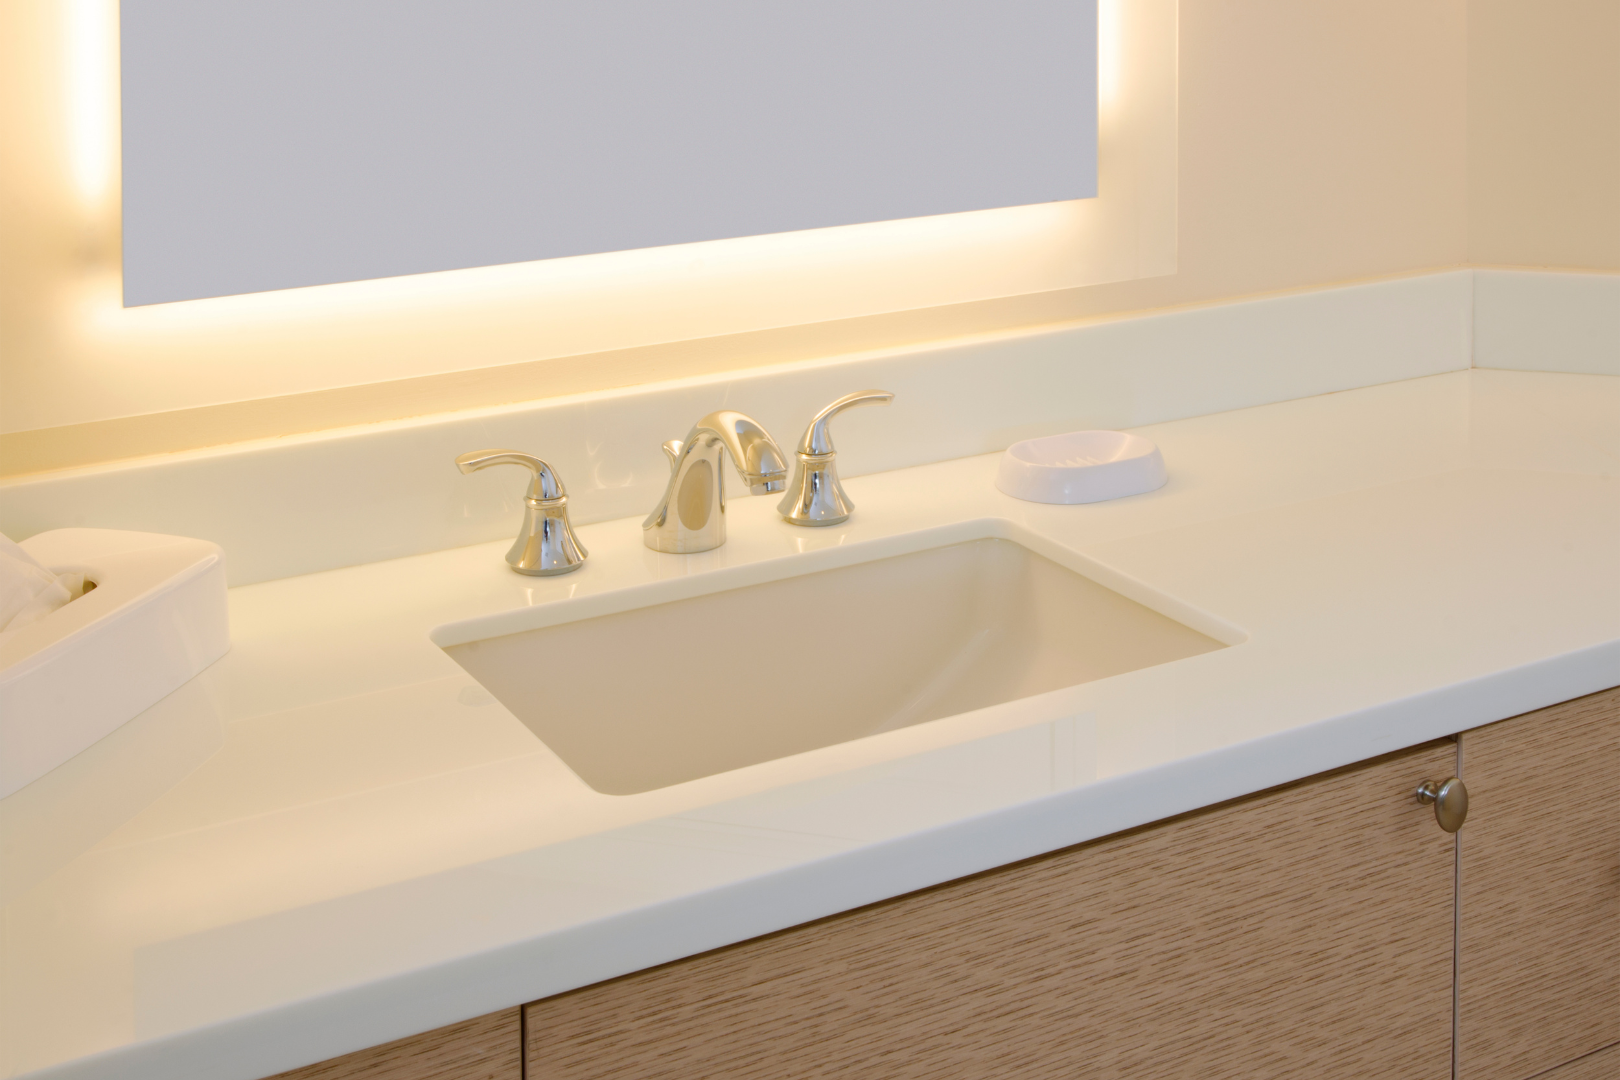 Integral sink to install in your bathroom